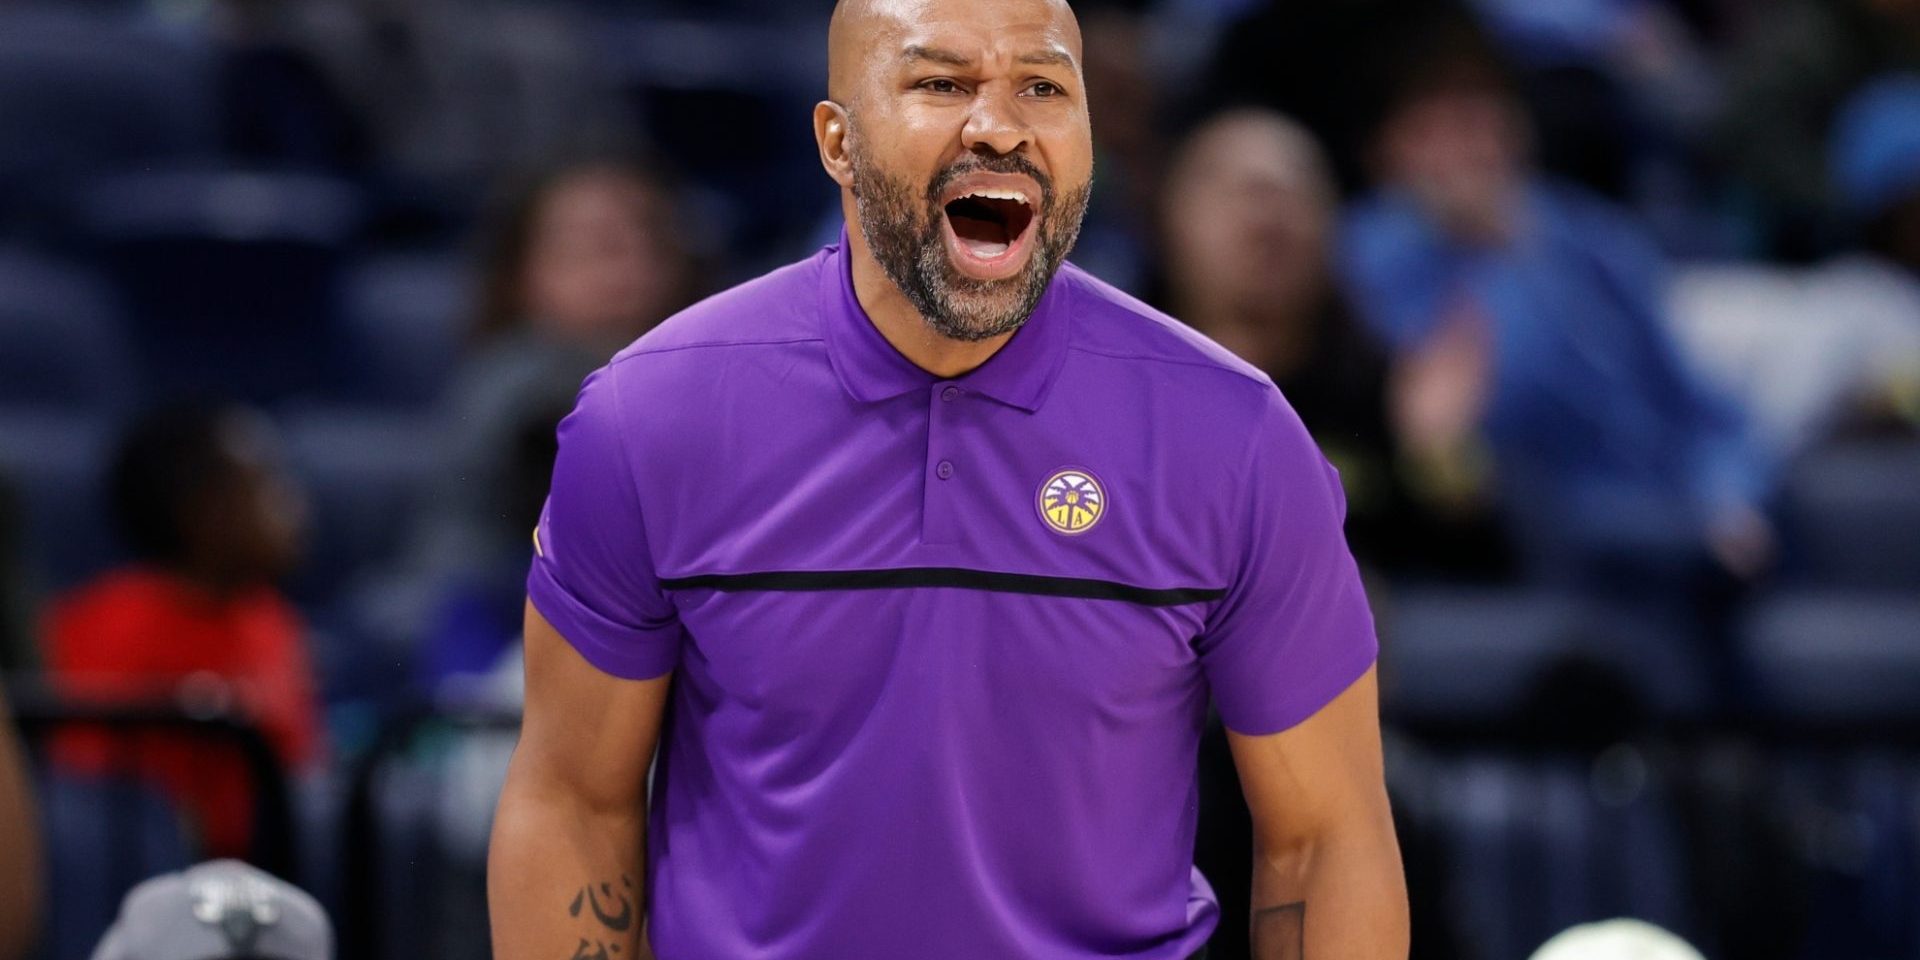 Los Angeles Sparks head coach and general manager Derek Fisher yells to his team during the first half of the WNBA basketball game against the Chicago Sky, Friday, May 6, 2022, in Chicago. (AP Photo/Kamil Krzaczynski)